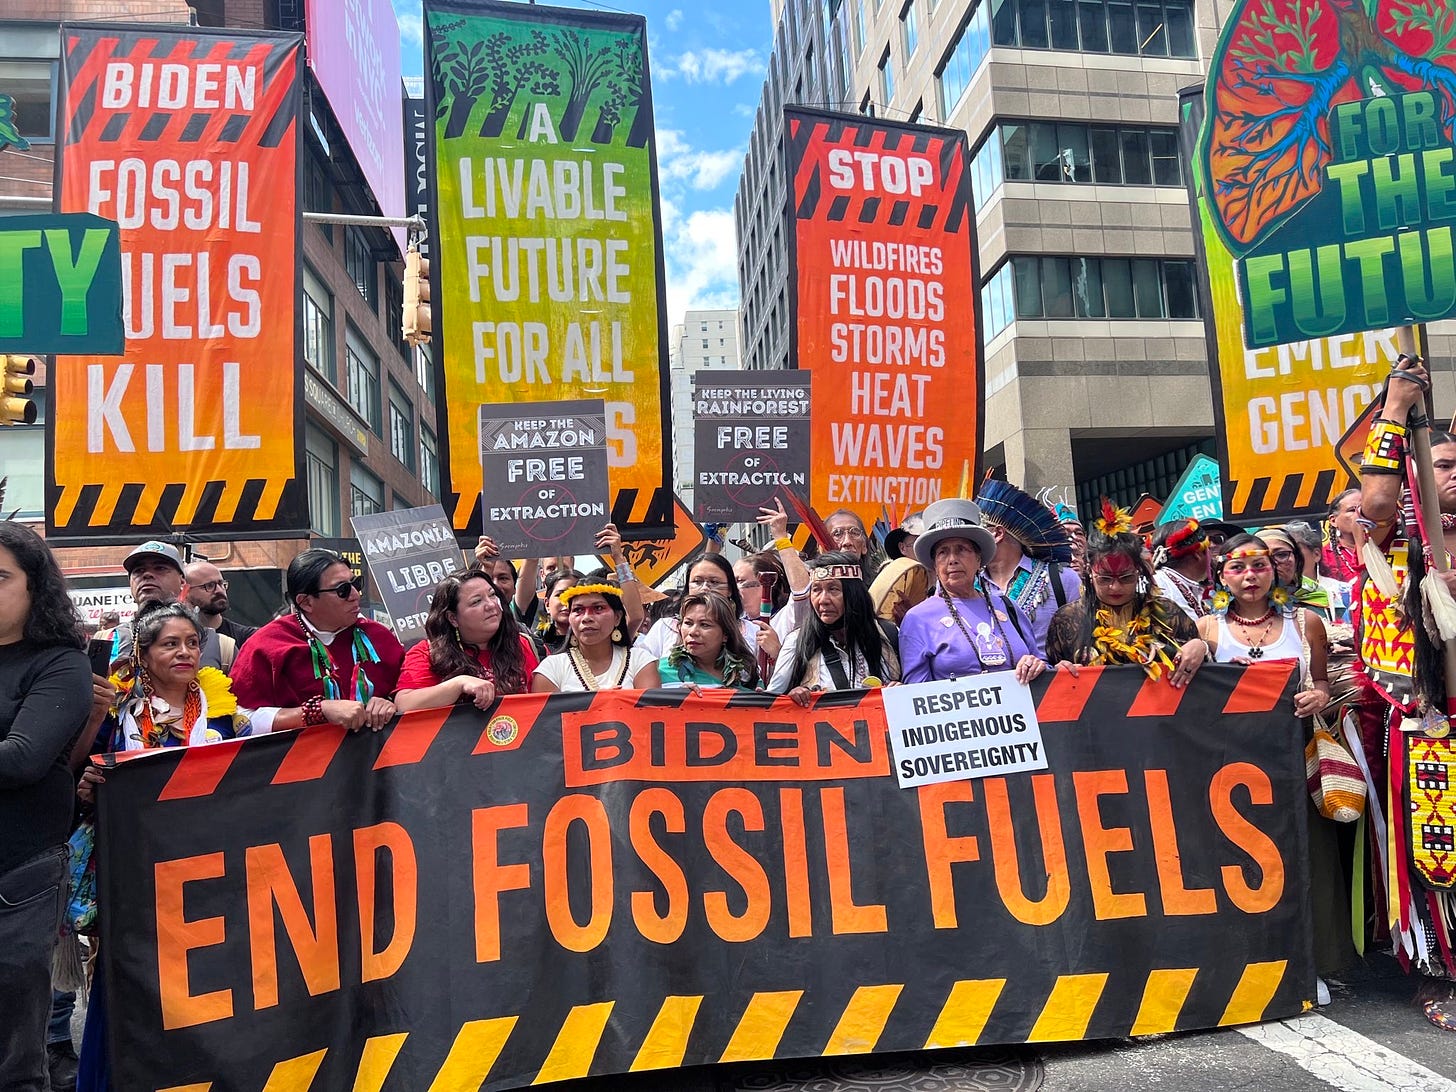 Indigenous leaders stand at the front of the March to End Fossil Fuels holding signs that say, "No Fossil Fuels" and "Respect Indigenous Sovereignty"